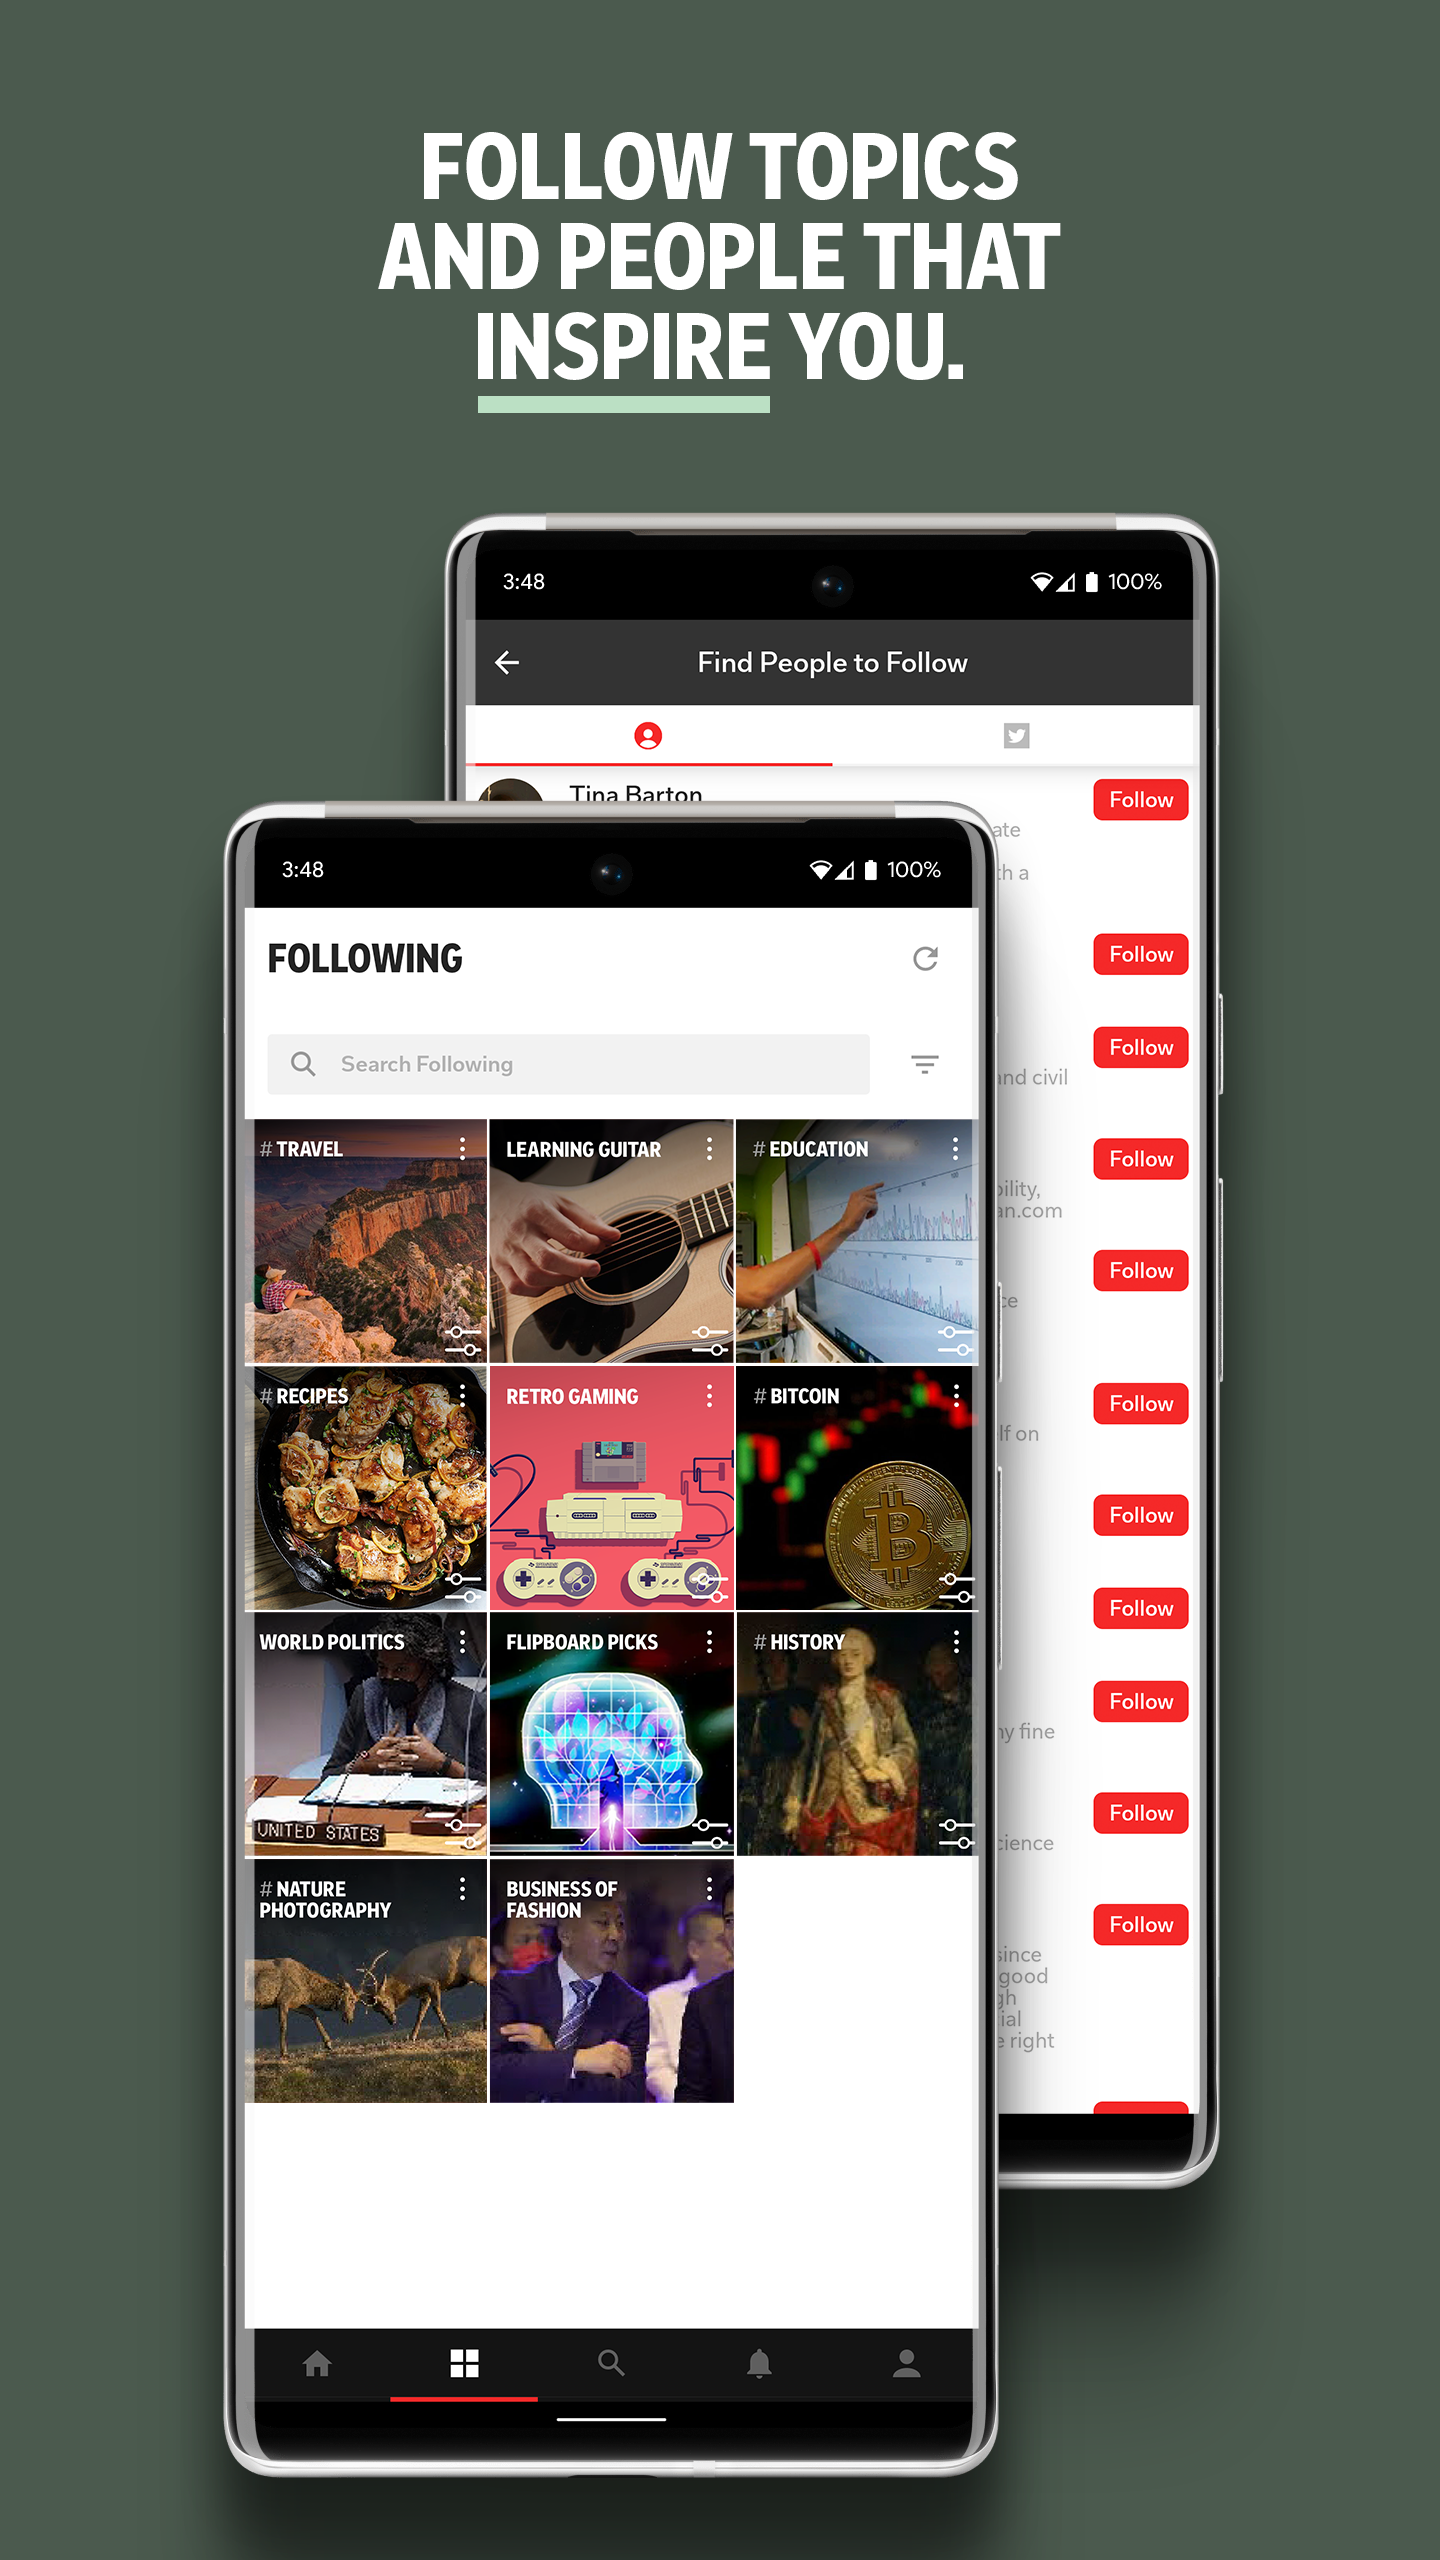 Android application Flipboard - Latest News, Top Stories & Lifestyle screenshort